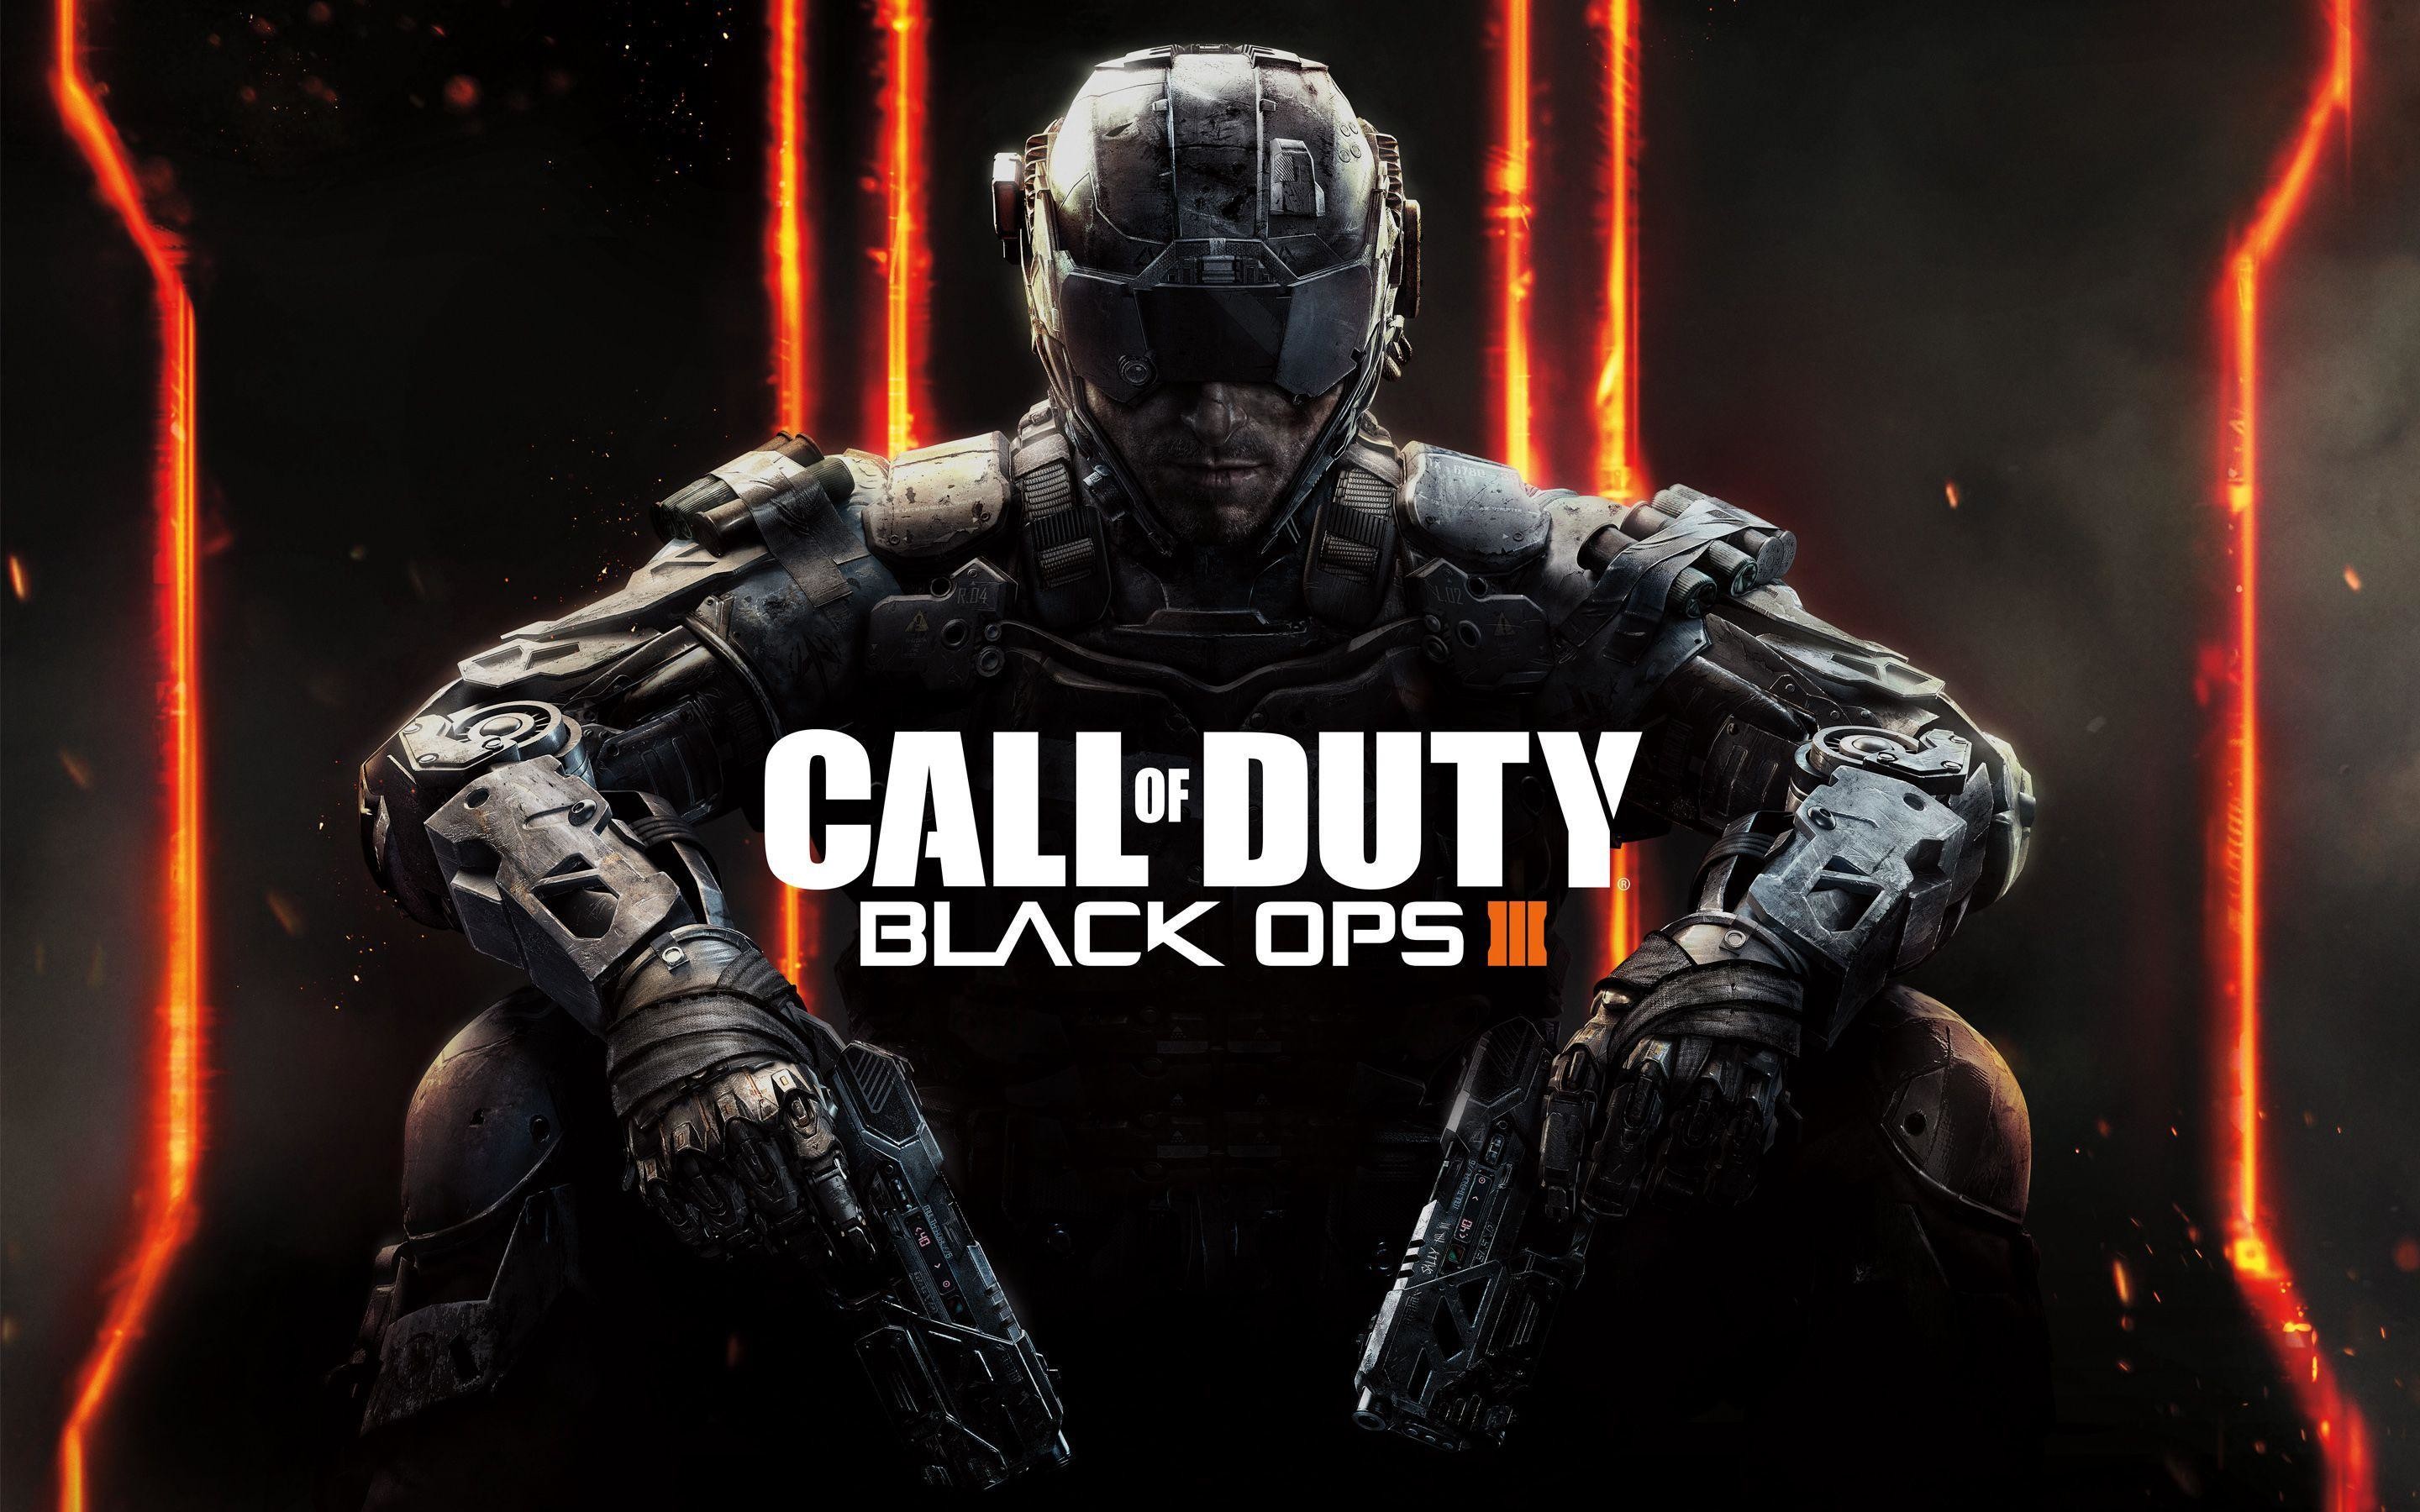 2880x1800 39 Call Of Duty: Black Ops III HD Wallpapers | Backgrounds .